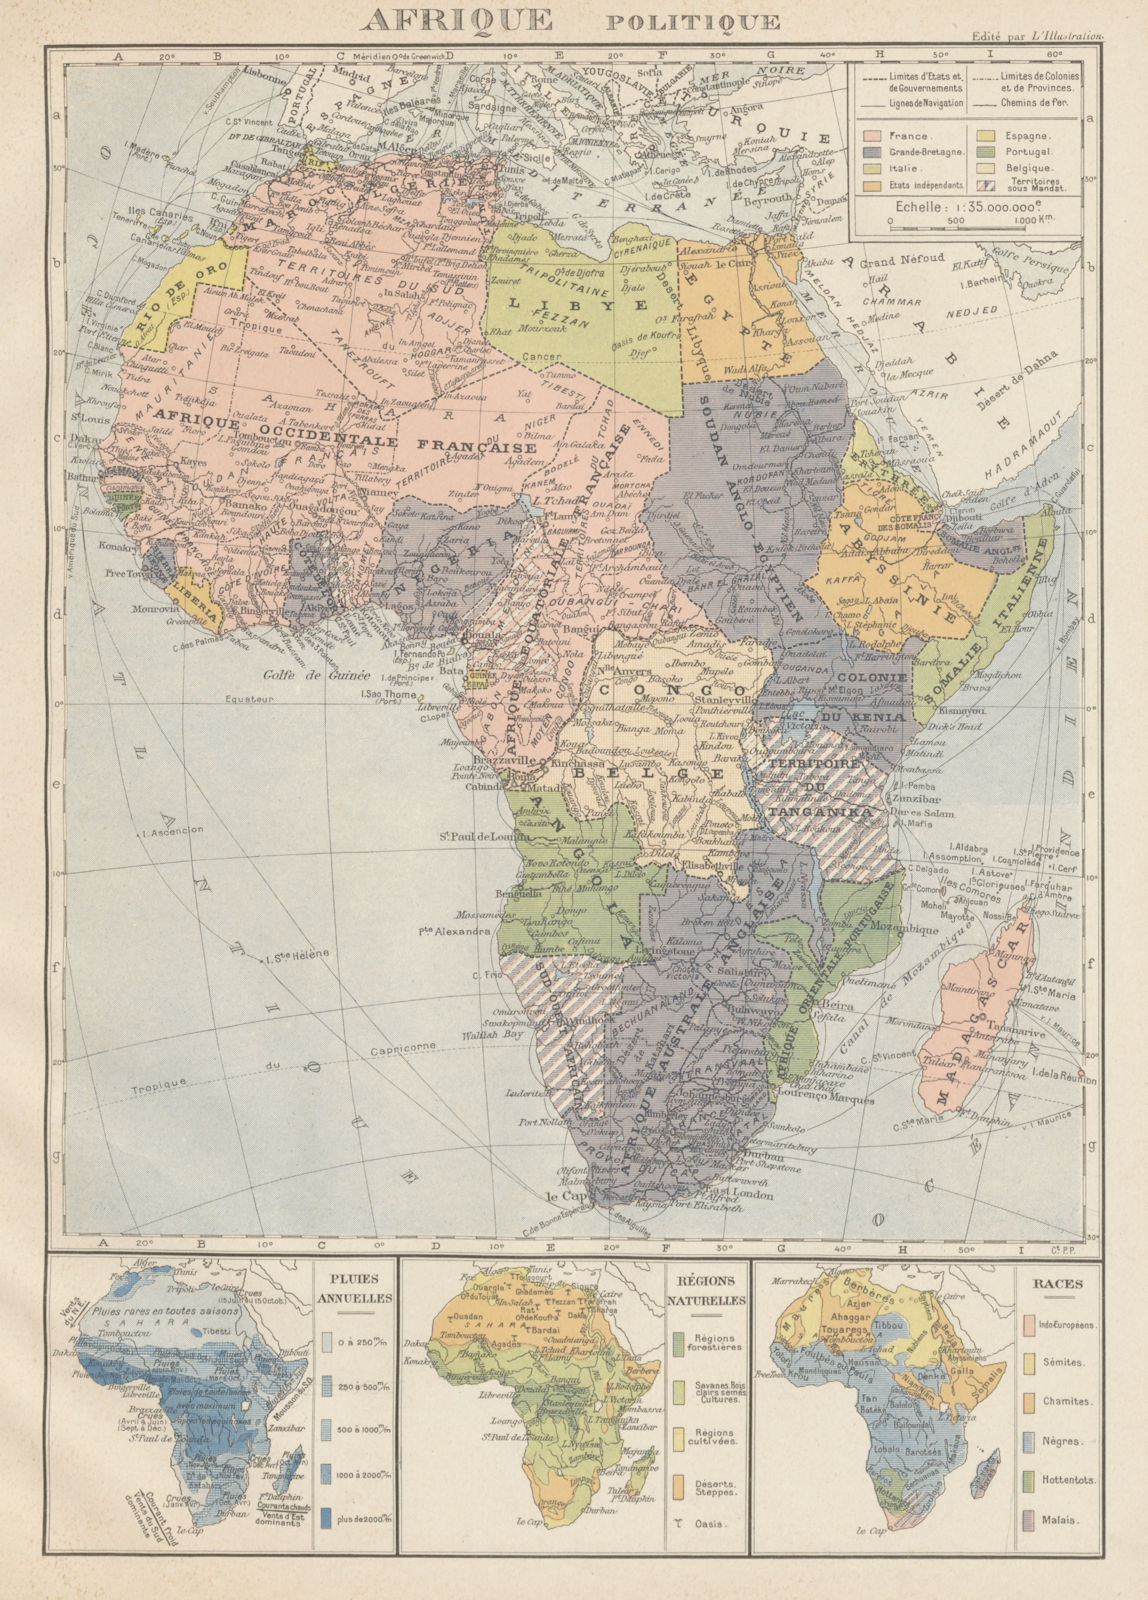 Associate Product COLONIAL AFRICA Afrique. League of Nations Mandates. Ethnicity 1929 old map